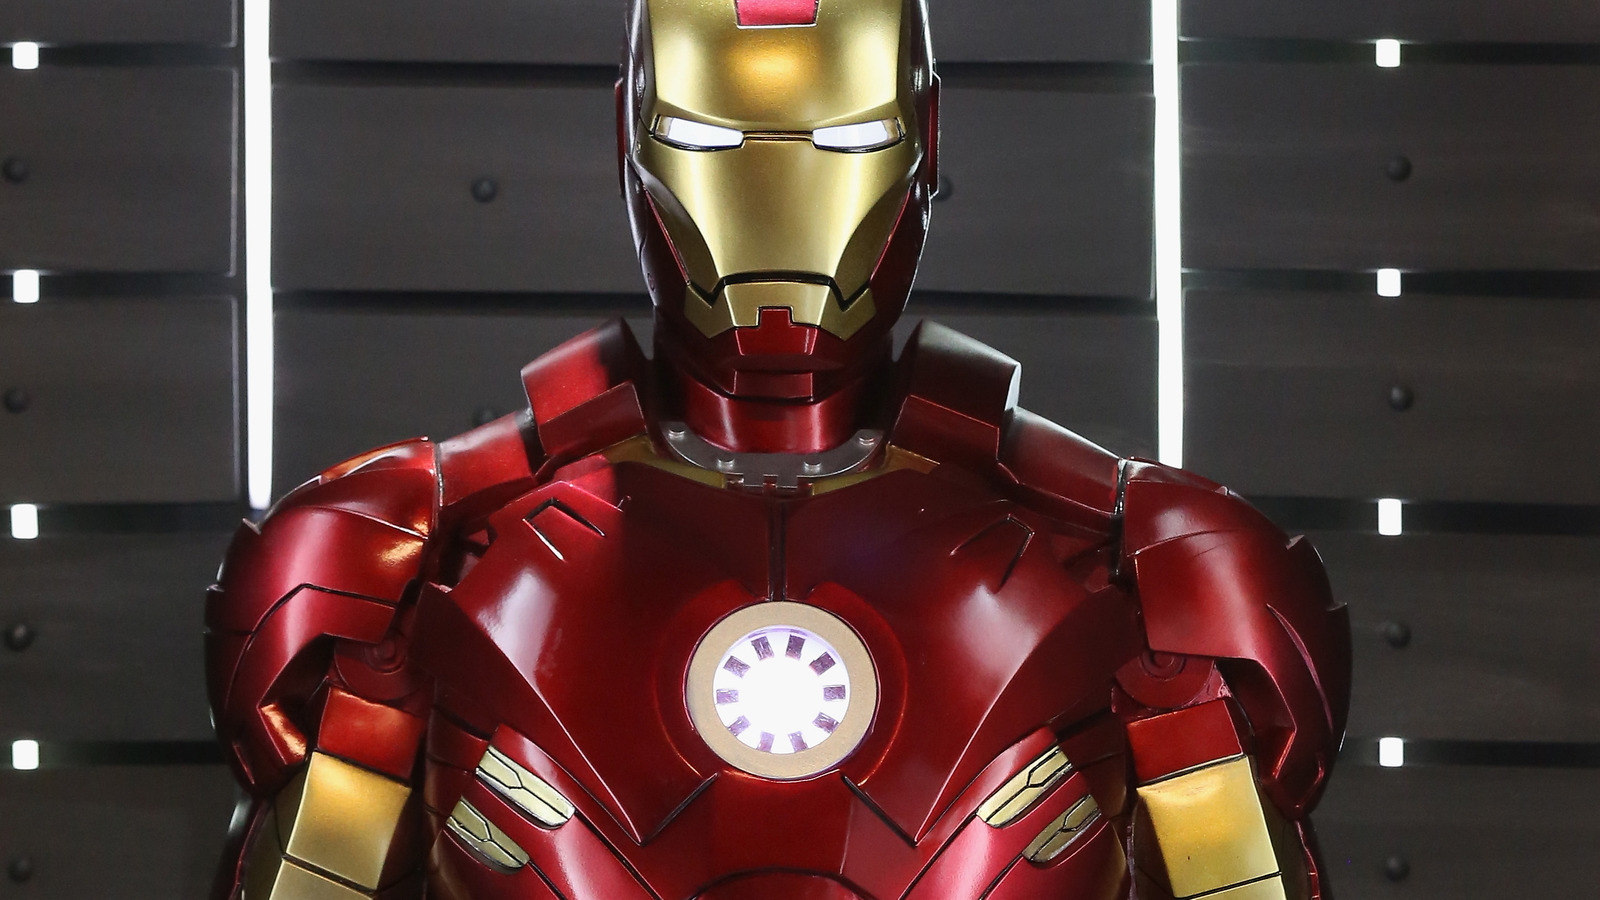 Why The U.S. Military Scrapped Its Real-Life Iron Man Suit